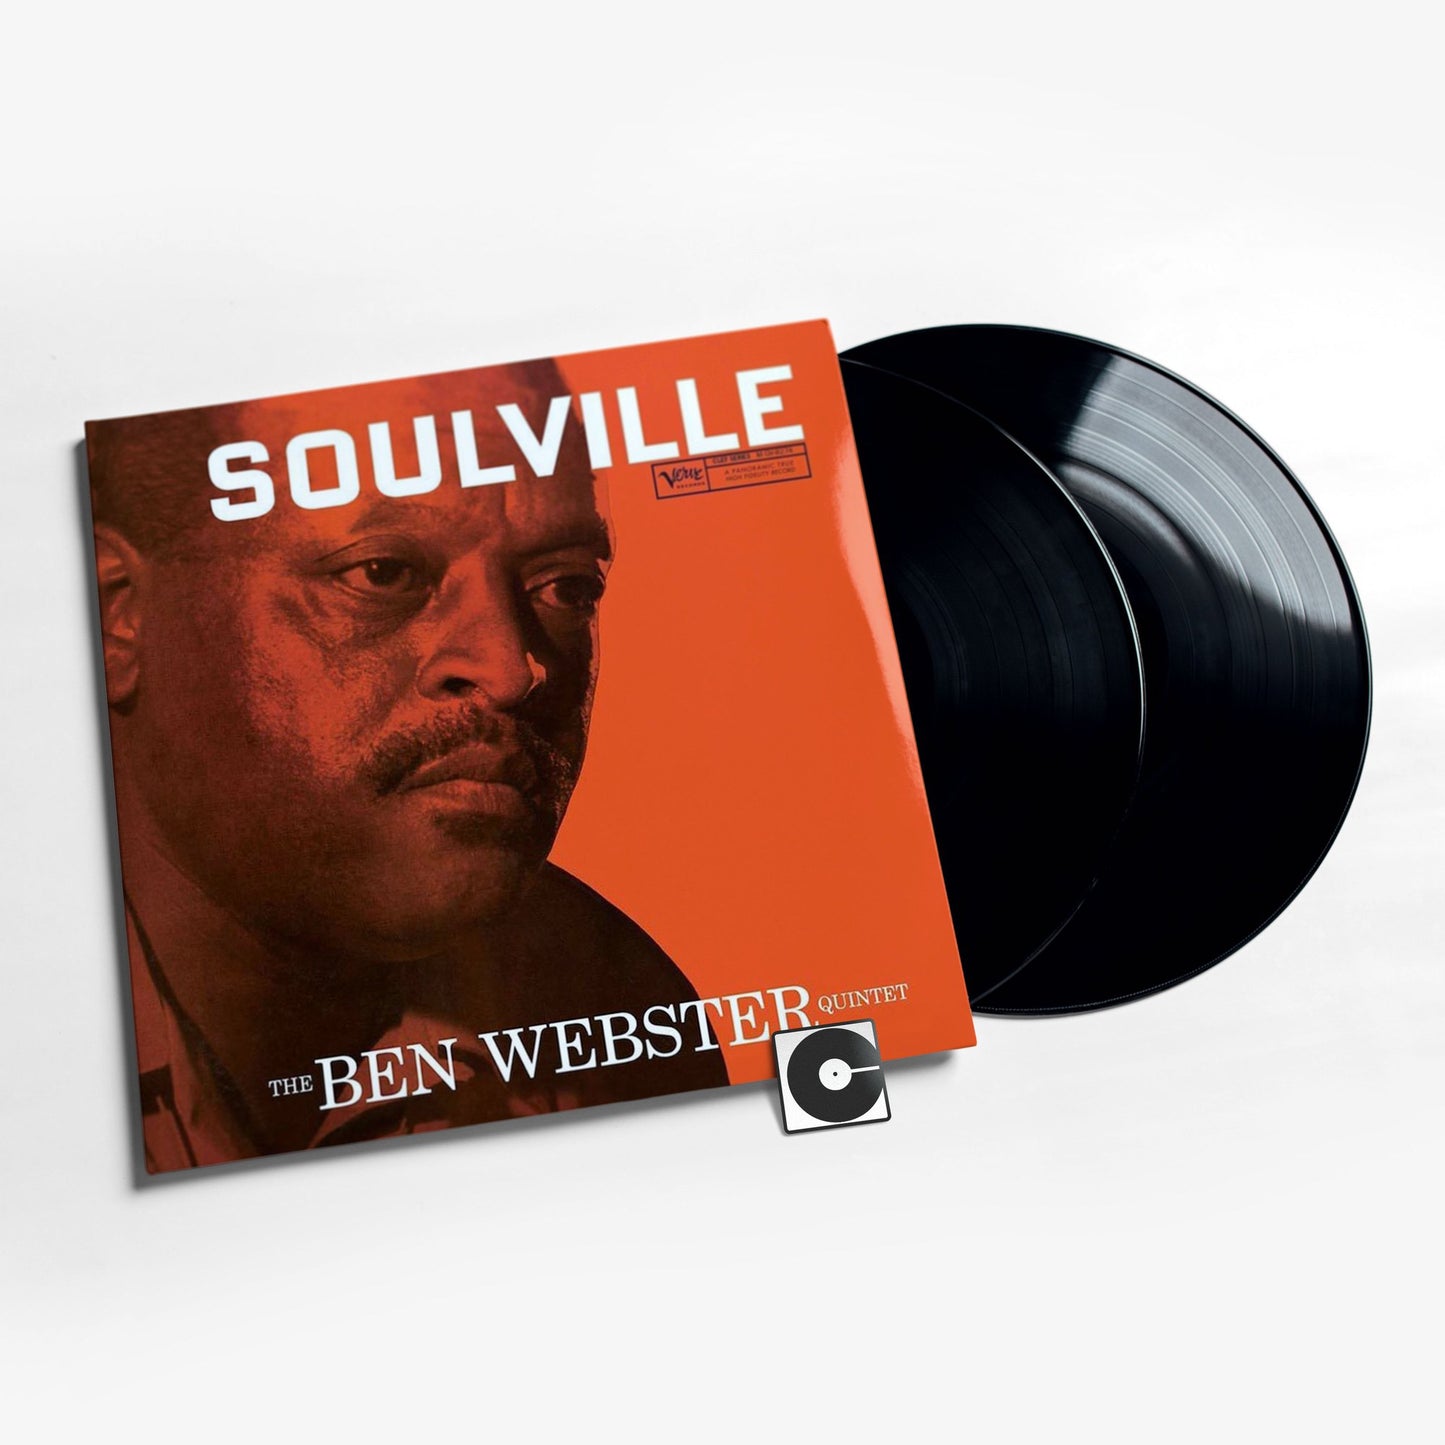 Ben Webster - "Soulville" Analogue Productions